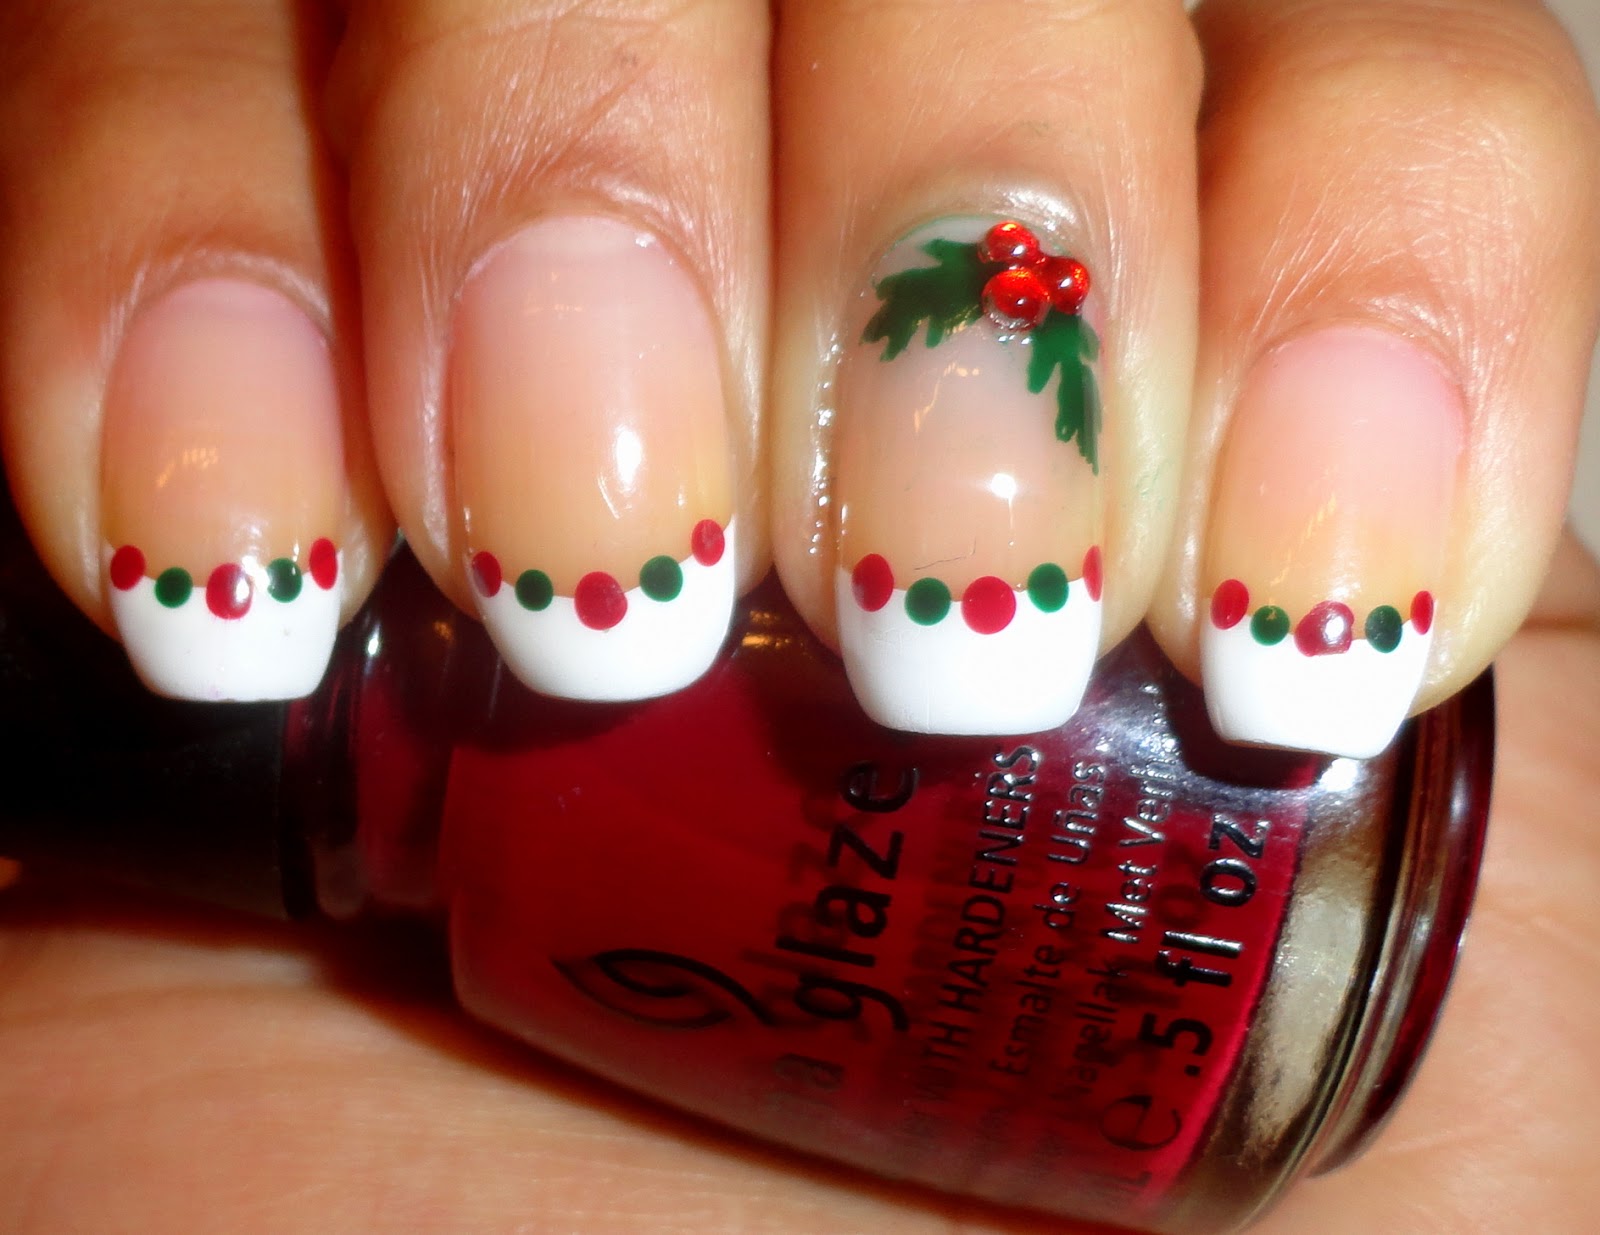 6. "Holly Nails" - wide 6